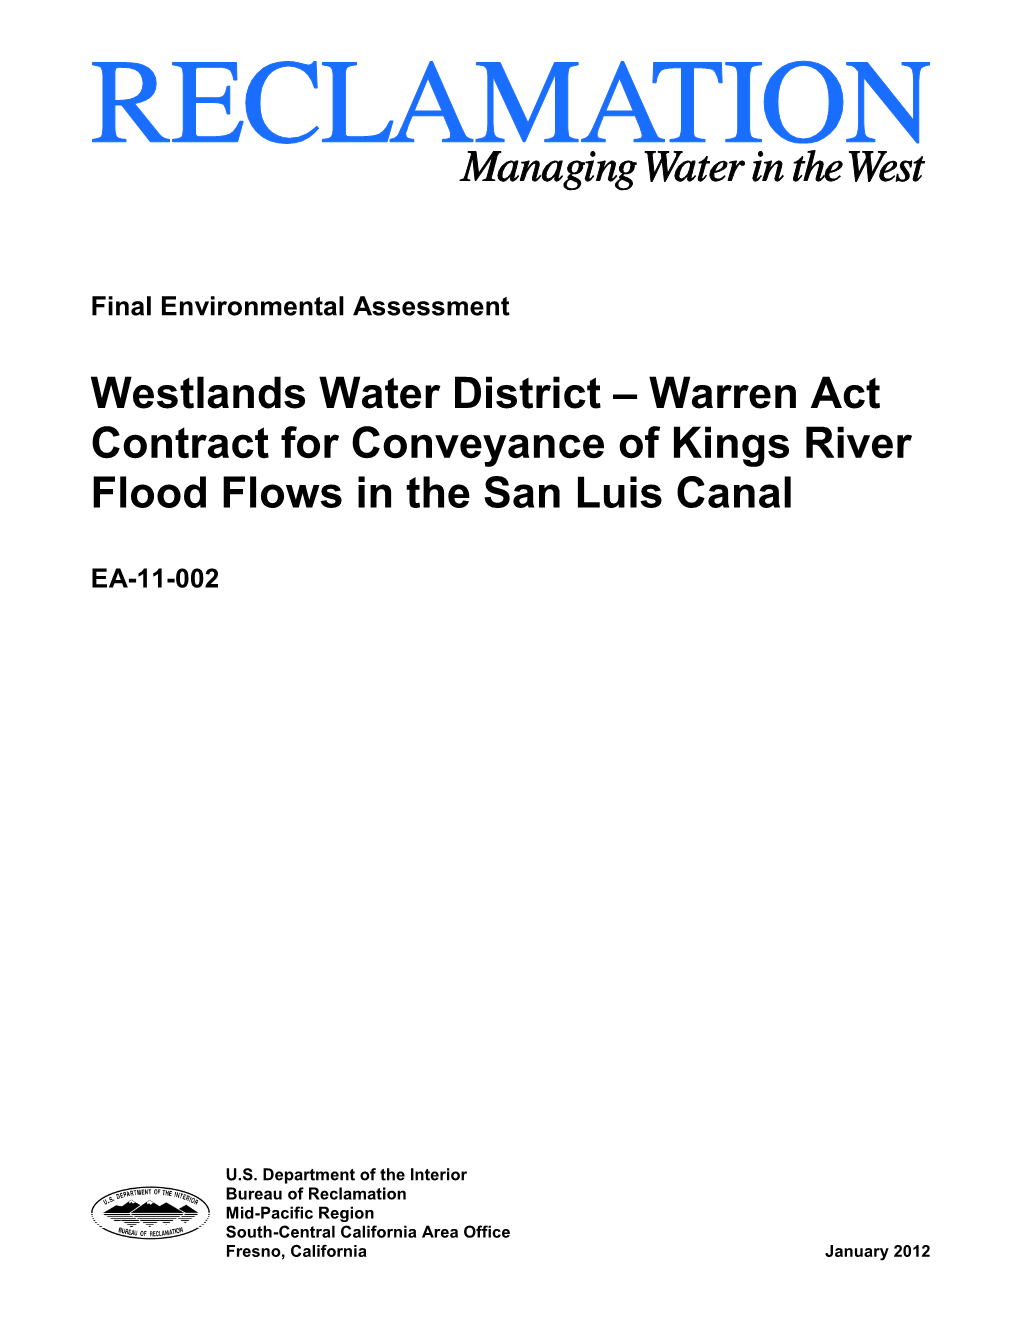 Westlands Water District – Warren Act Contract for Conveyance of Kings River Flood Flows in the San Luis Canal